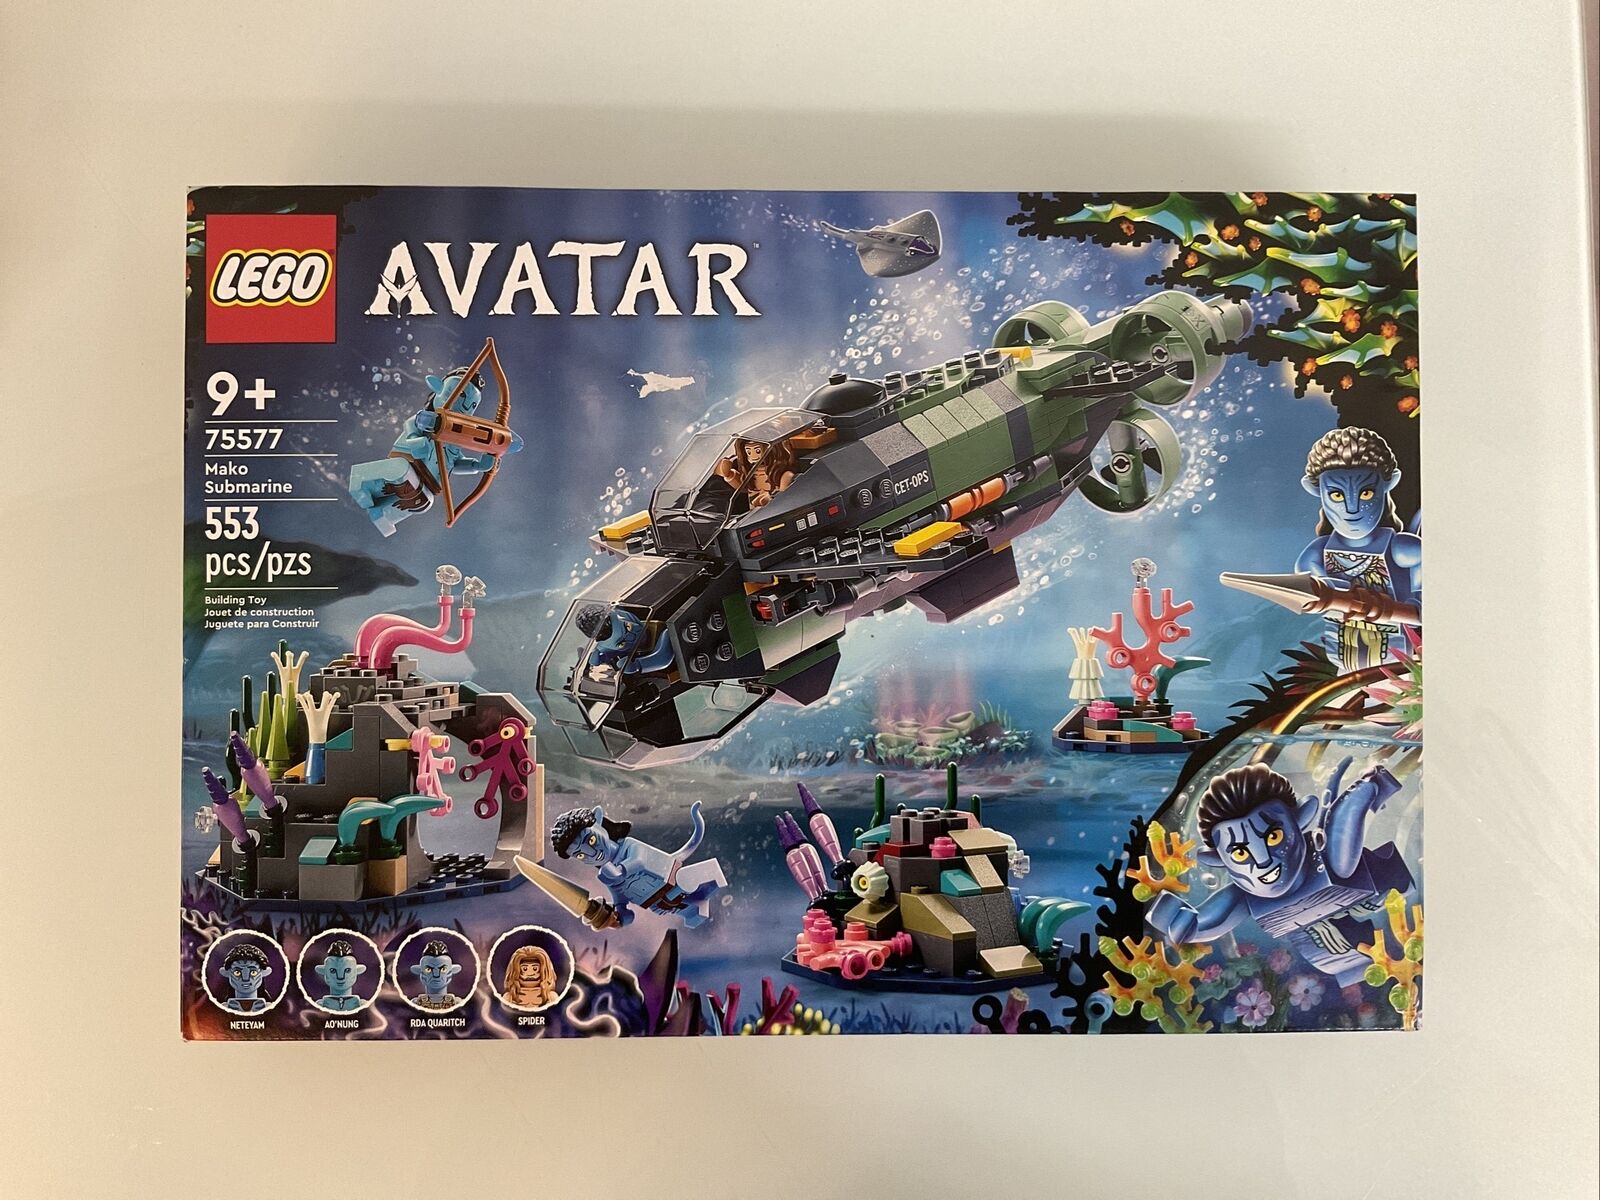 LEGO Avatar The Way of Water Mako Submarine​ 75577 Buildable Toy Model (553 Pcs)